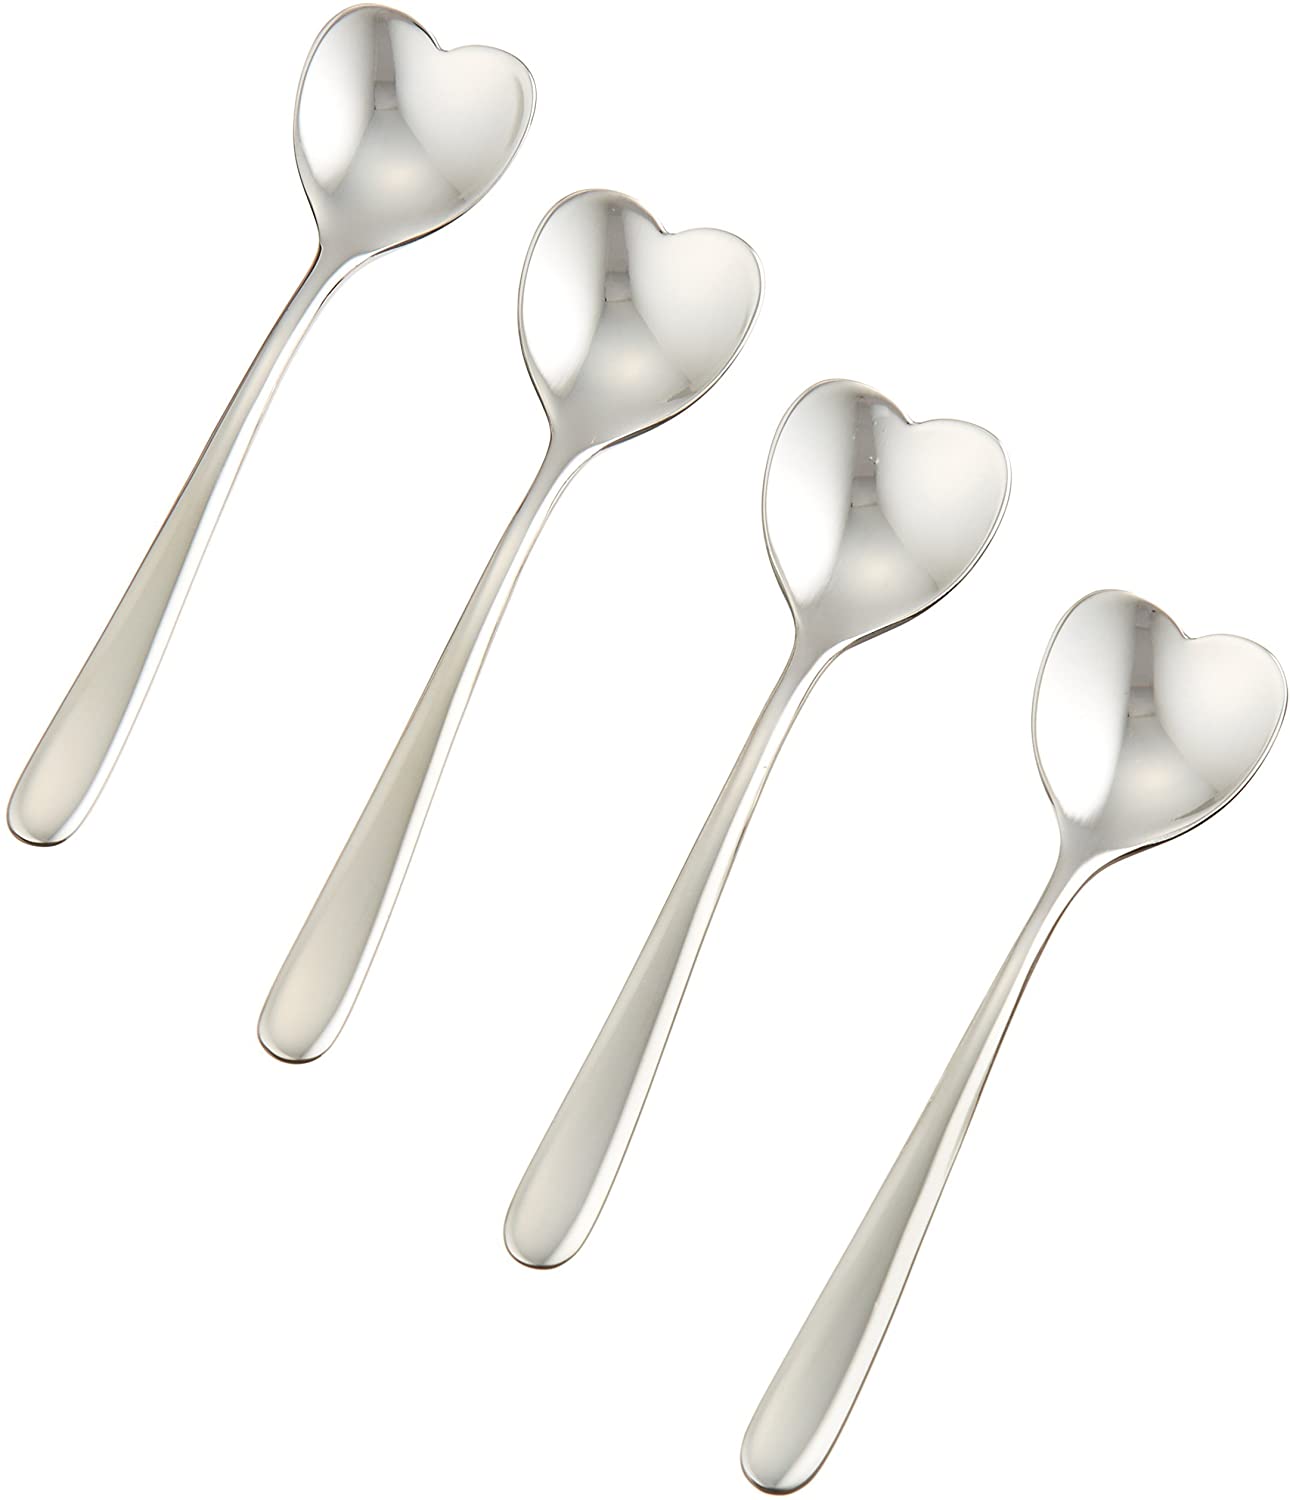 A Di Alessi Heart Shaped Coffee Spoons in 18/10 Stainless Steel Mirror Polished, Set of Four